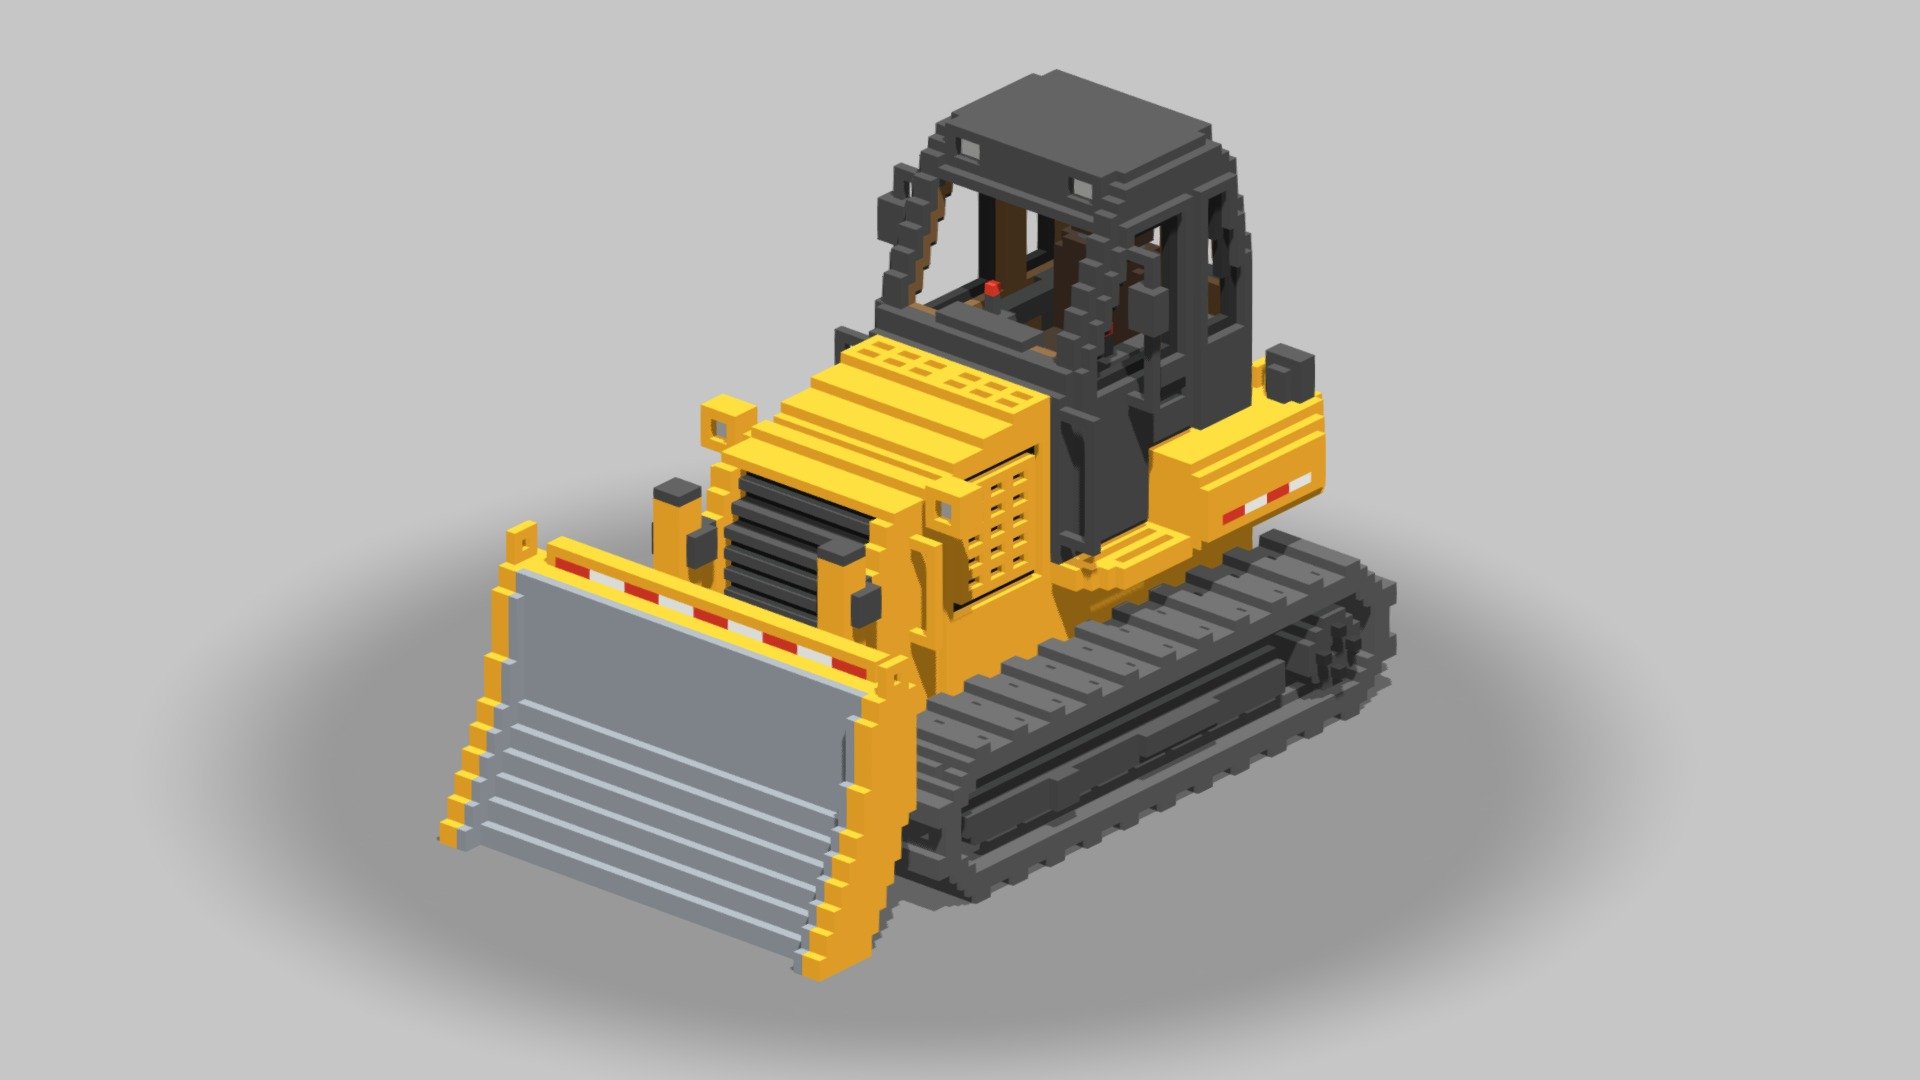 Voxel Bulldozer 3D model created in MagicaVoxel Editor.

Voxel Scale: 3

All Formats Size: 8.35 MB

(Polys Count: 11356) (Verts Count: 15818)

Available Formats: .vox (MagicaVoxel)” .obj + mtl” .qb

Your feedback and rating are important for me :) - Voxel Bulldozer - Buy Royalty Free 3D model by SHUBBAK3D 3d model